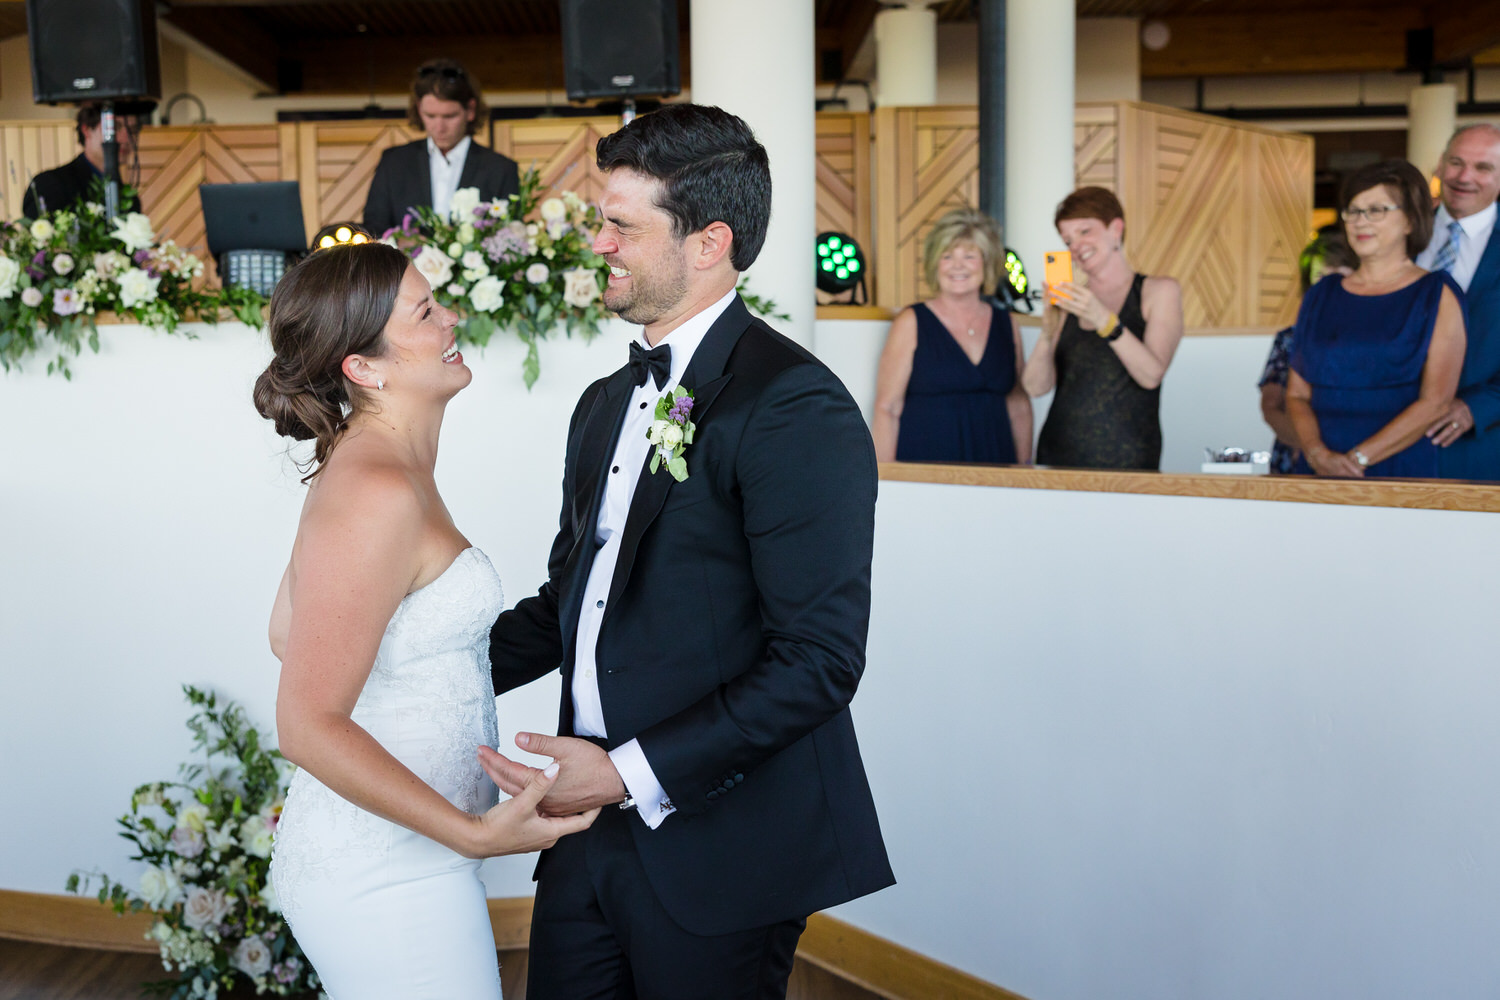 A joyful moment for the bride and groom at their High Camp Palisades Tahoe wedding.